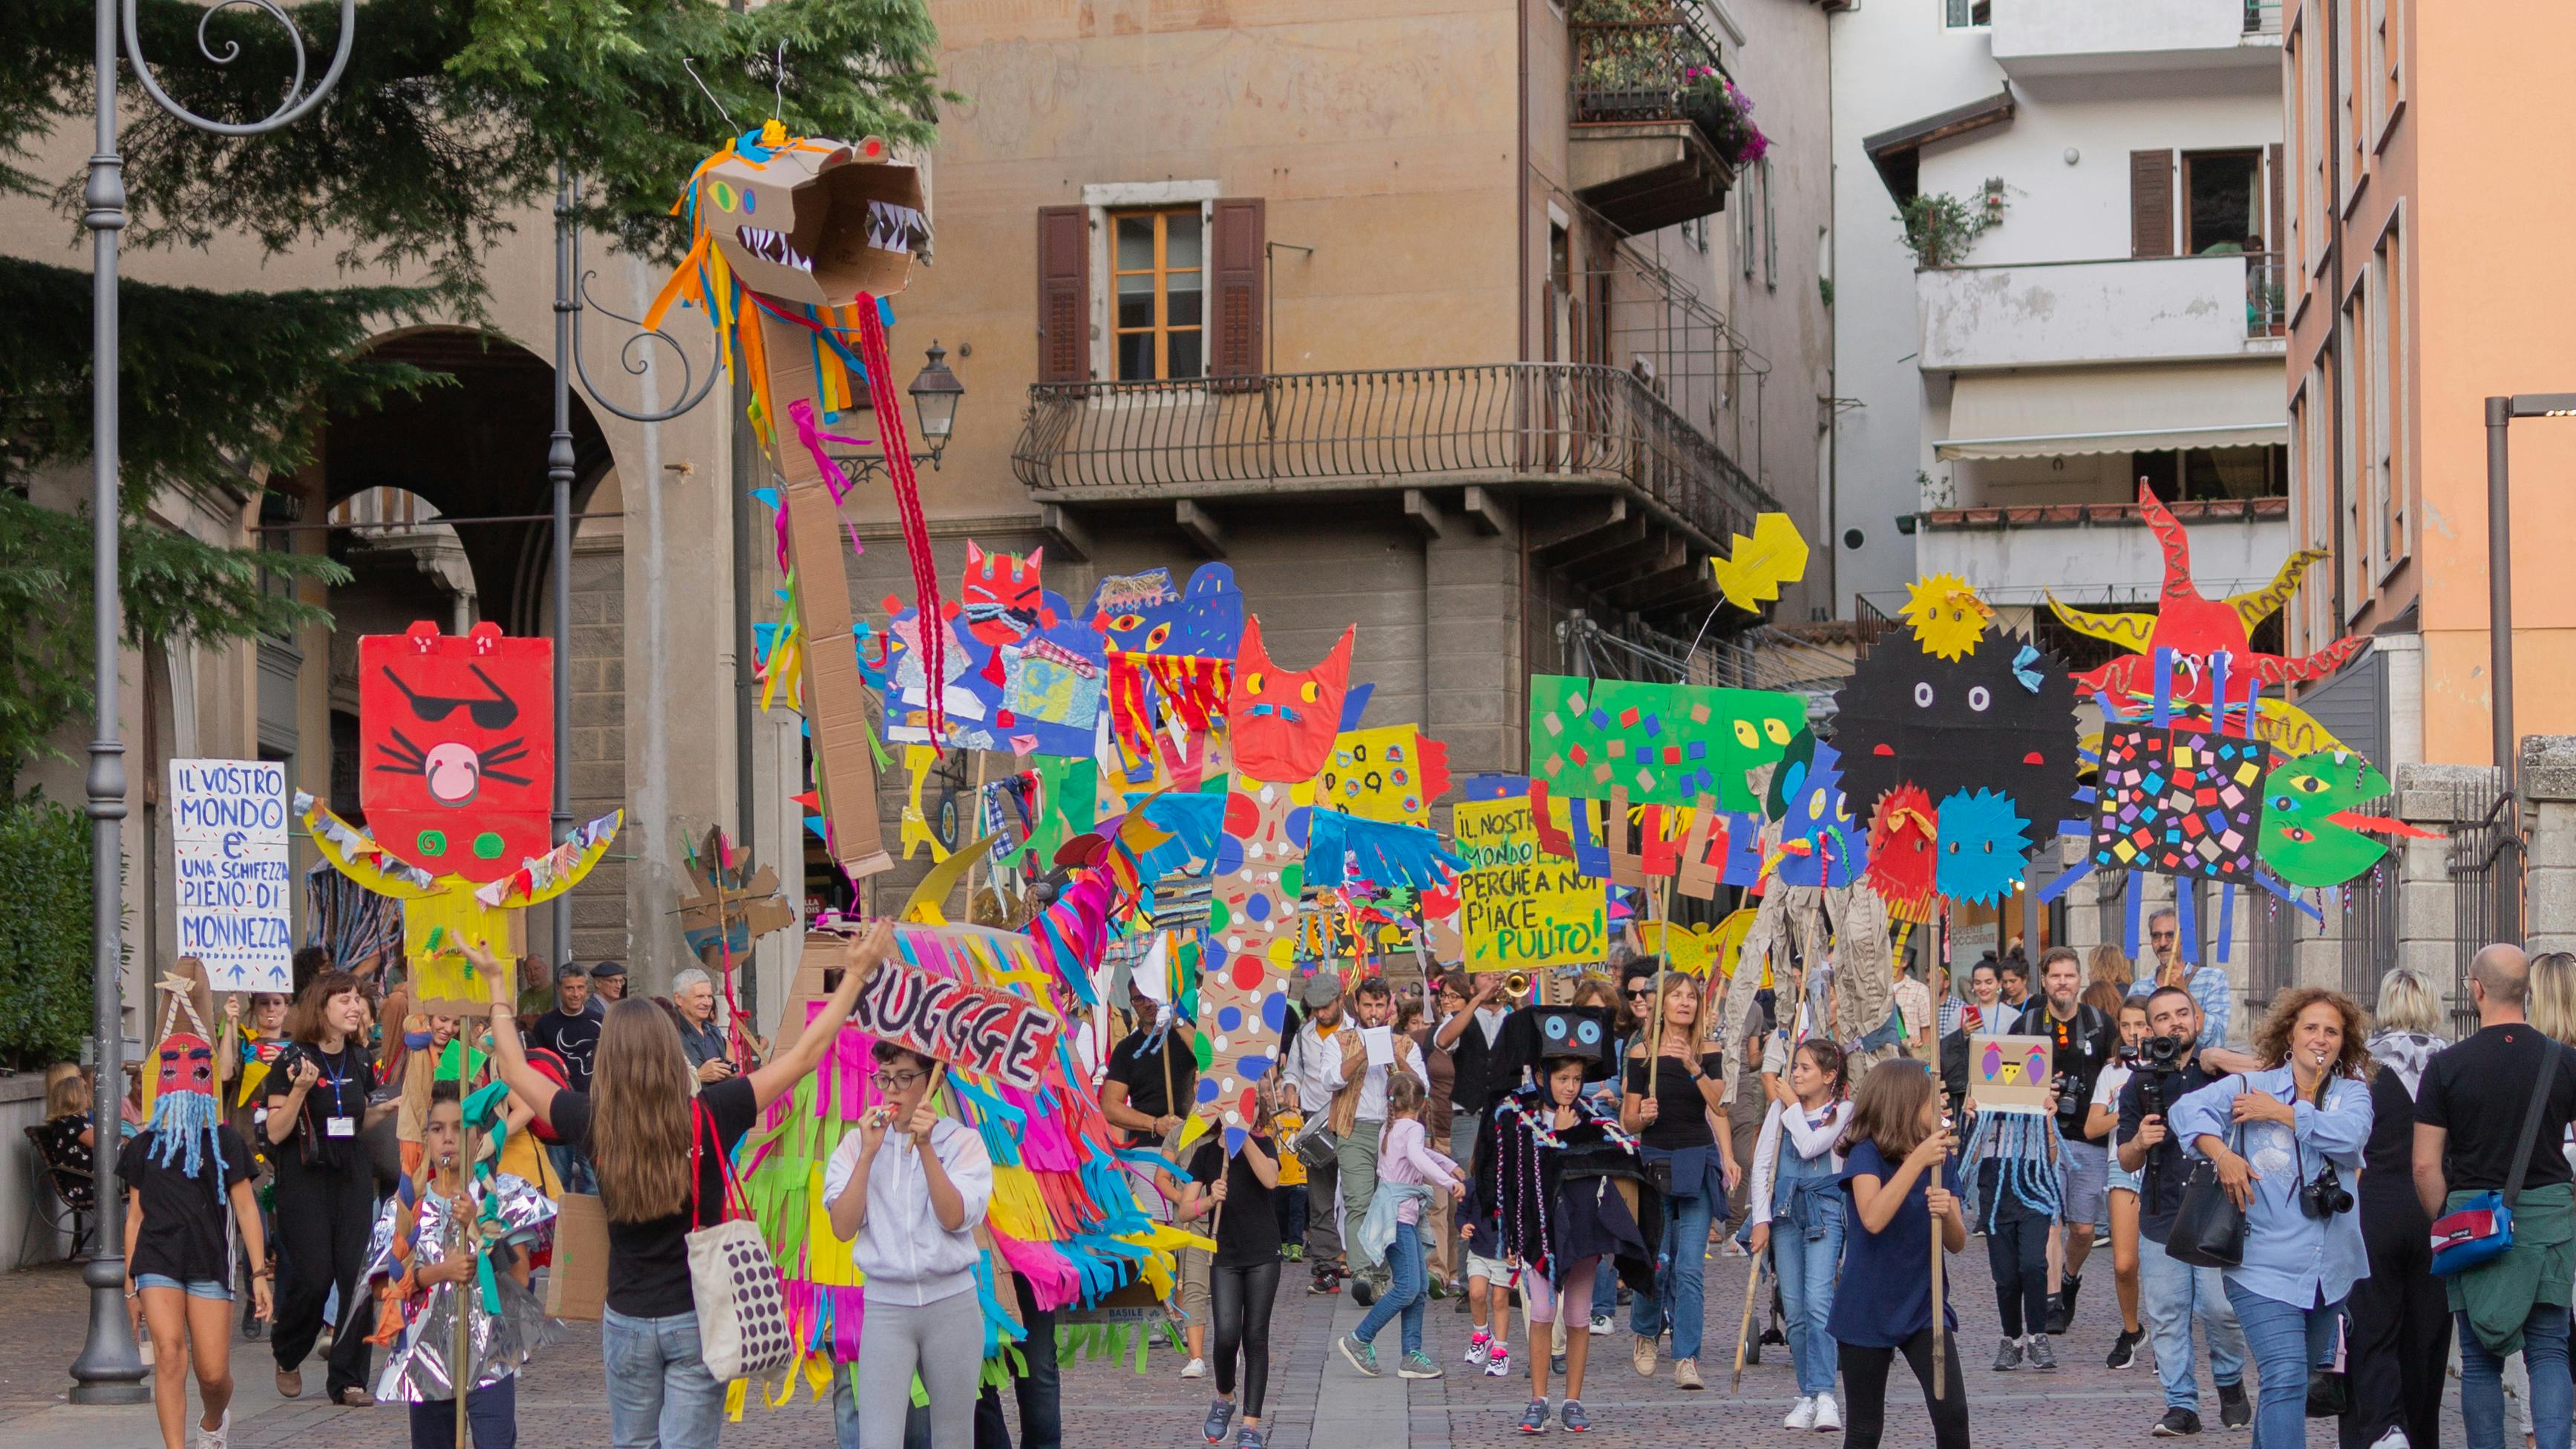 A parade of young people in the streets of Rovereto. They carry colourful signs made by the artist and march for environmental awareness.